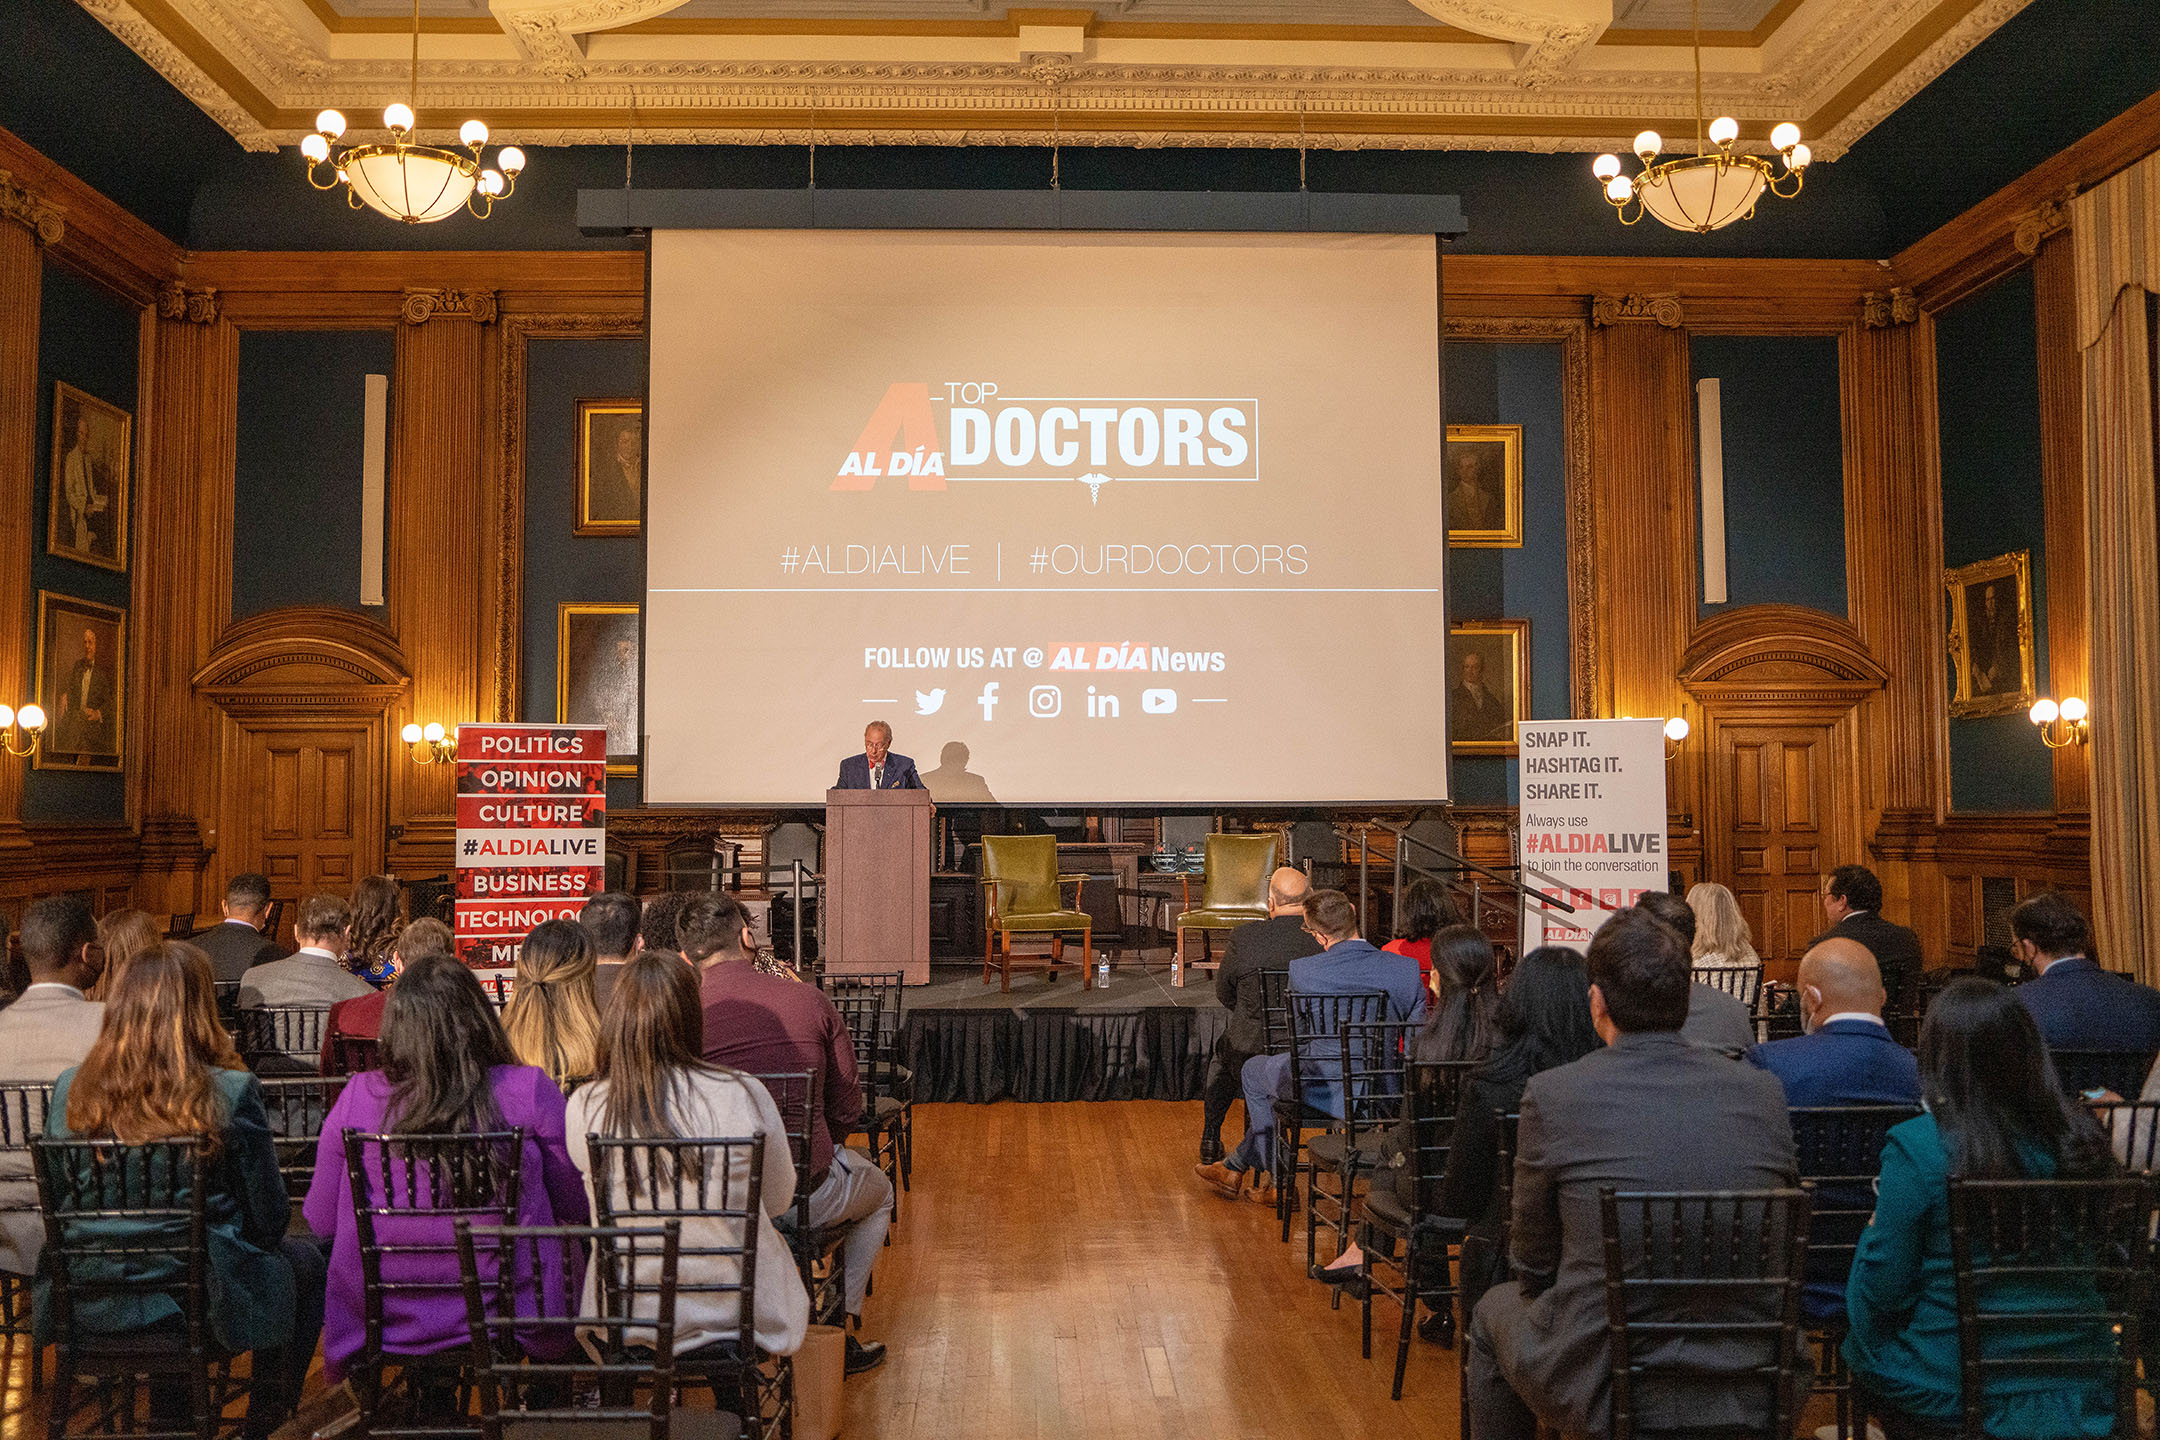 AL DÍA's Top Doctors were awarded for their service and dedication at The College of Physicians of Philadelphia January 26. Photos: Peter Fitzpatrick/AL DIA News